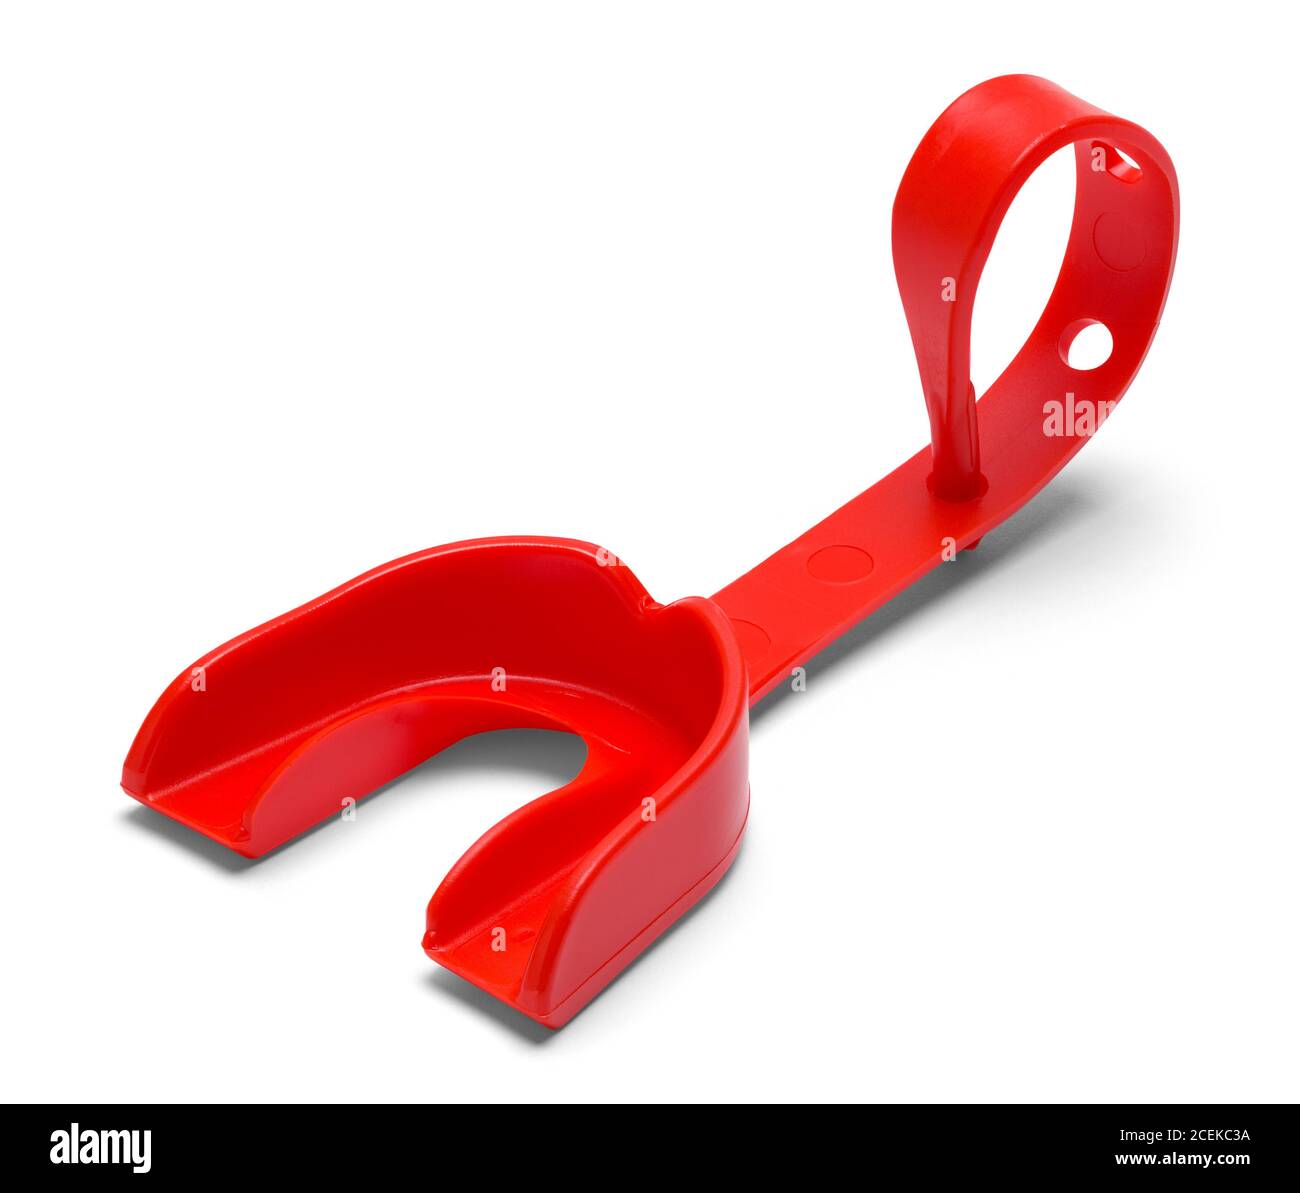 Red Sports Mouth Guard Isolated on White. Stock Photo